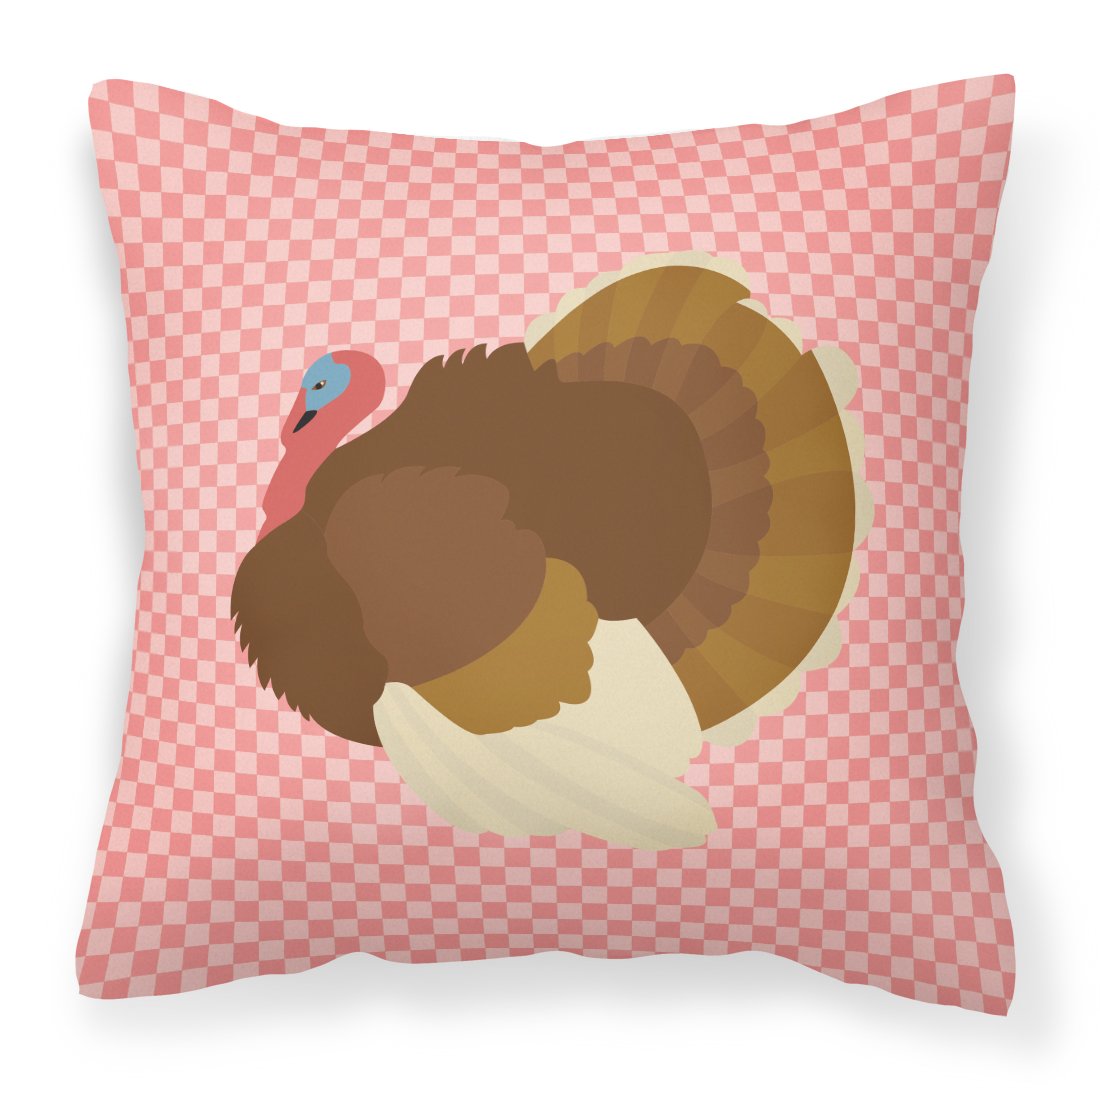 French Turkey Dindon Pink Check Fabric Decorative Pillow BB7990PW1818 by Caroline's Treasures